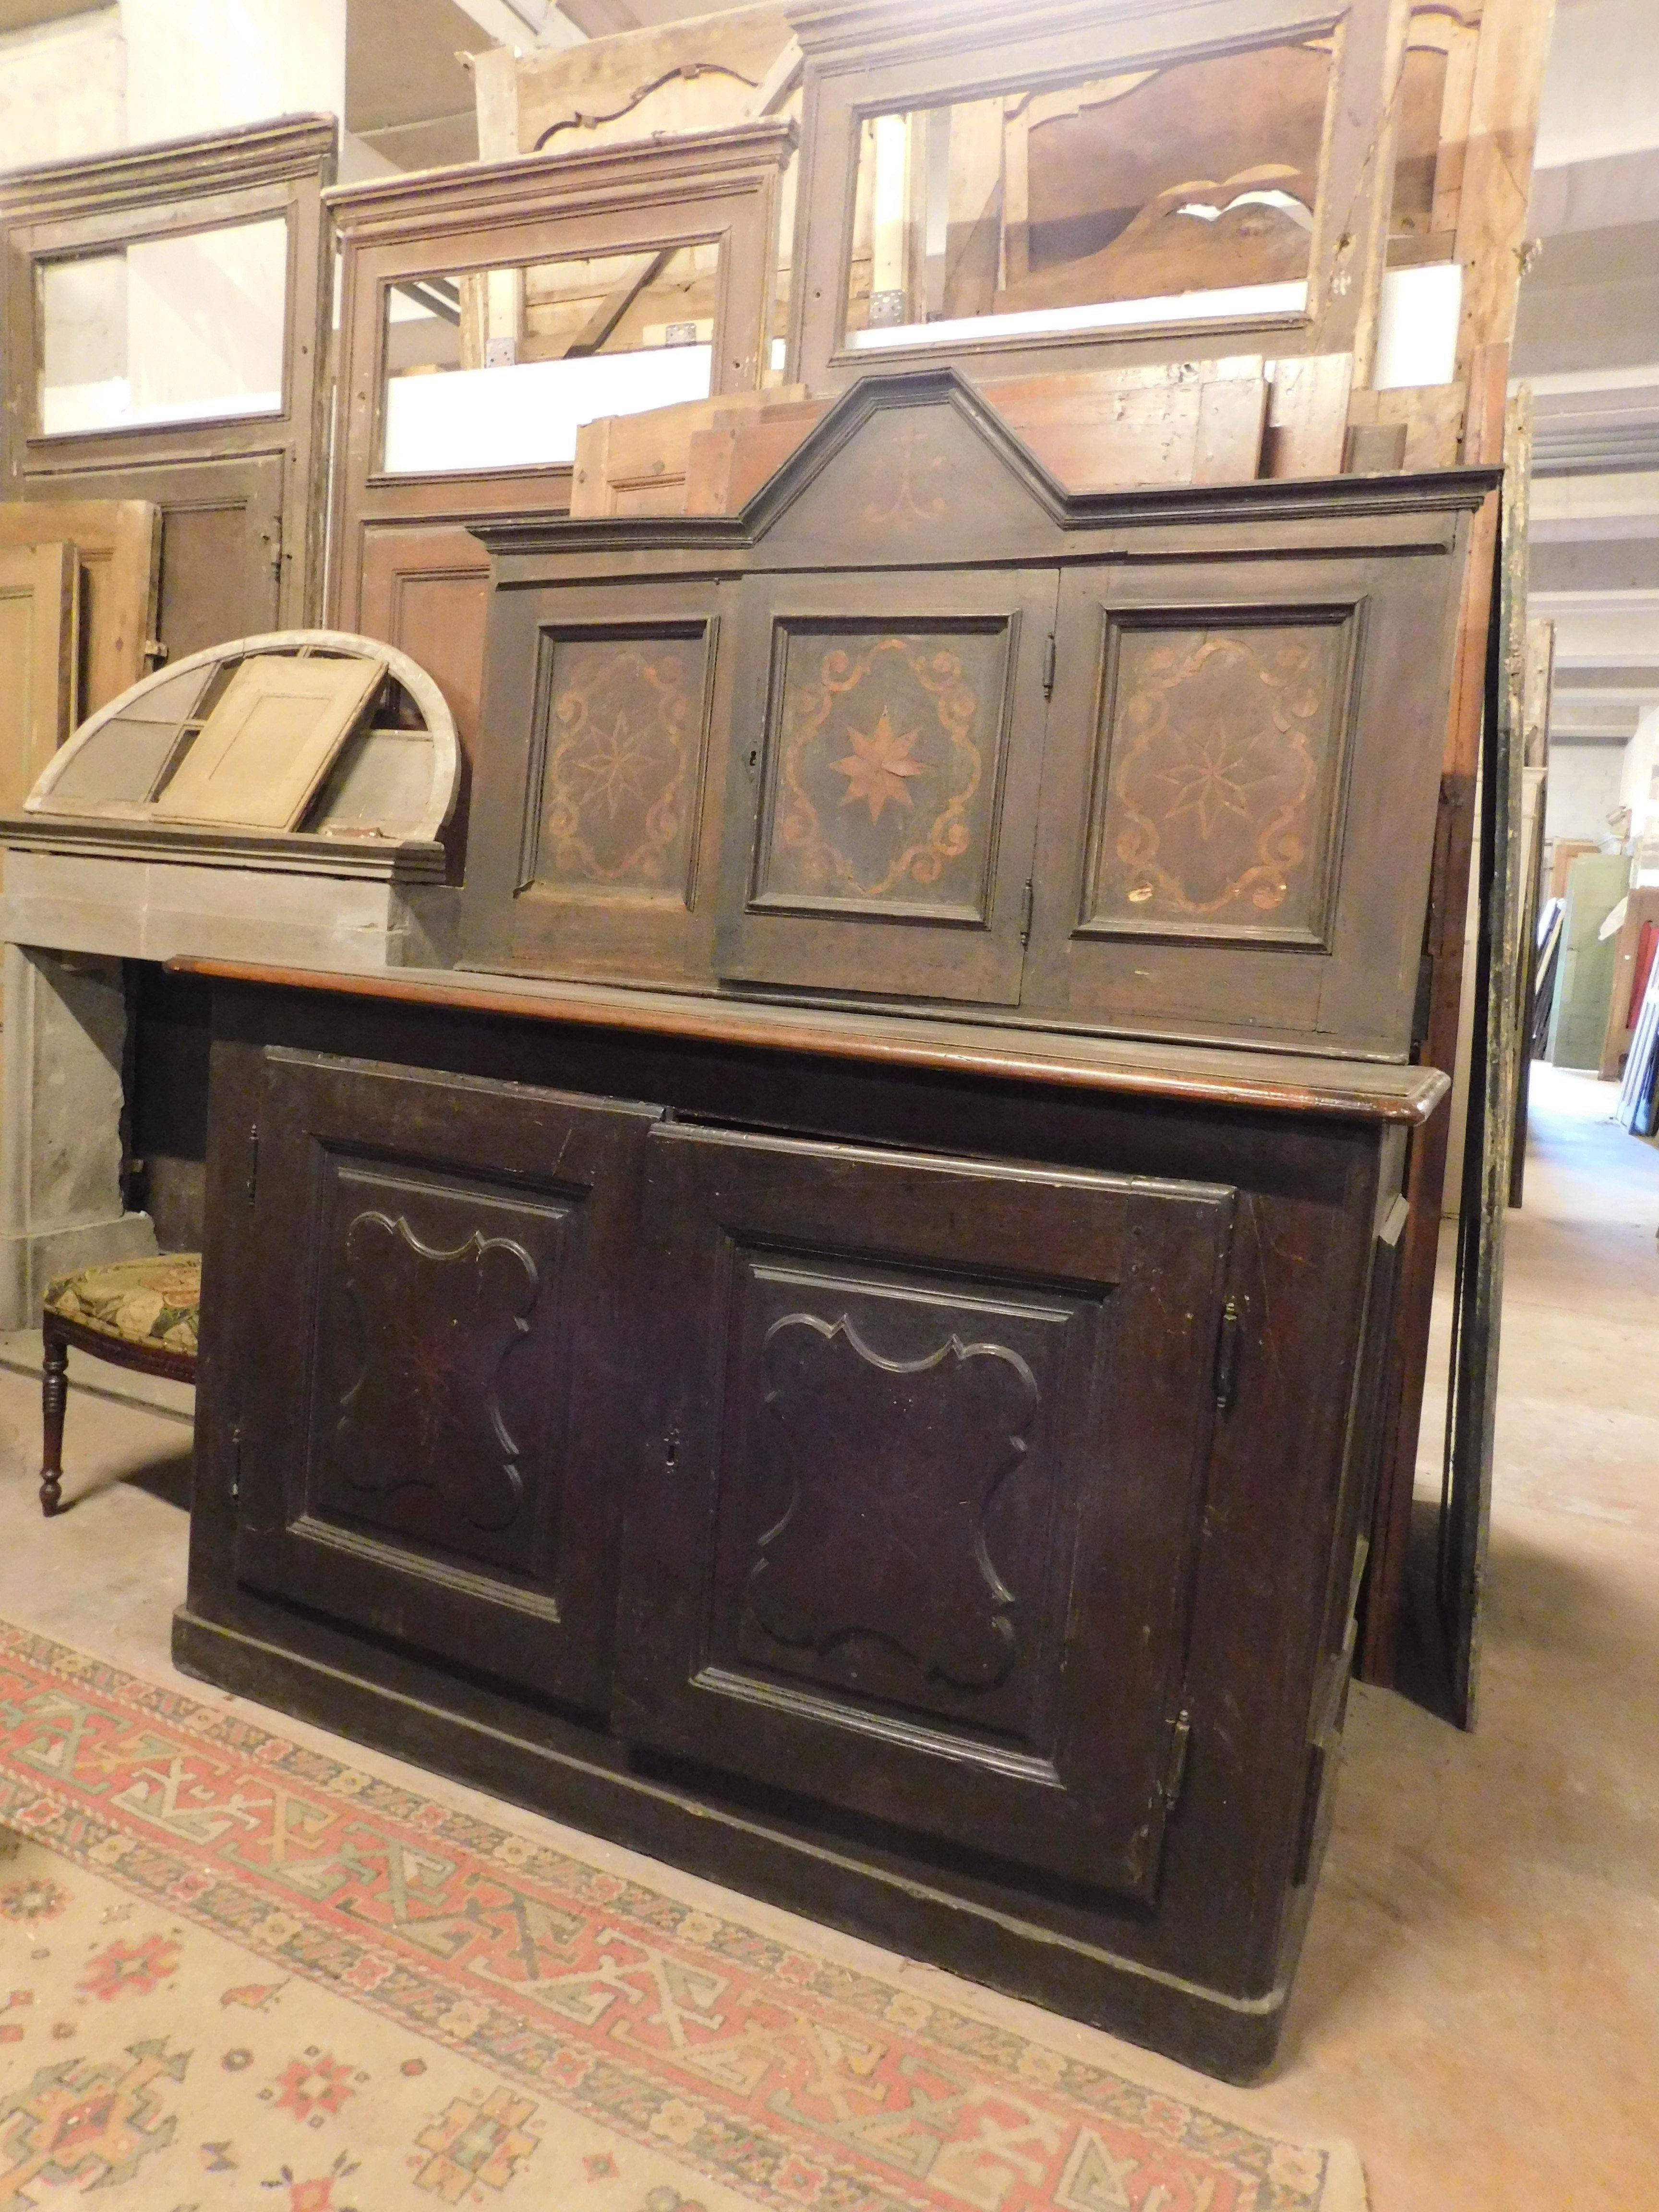 Antique sideboard in walnut with inlays in the upper part, complete with internal poplar chest of drawers, built-in wardrobe placard in the upper part and two doors in the base. hand-built in the '6/'700 period, maximum size cm w 165 x h 202 x d 64,